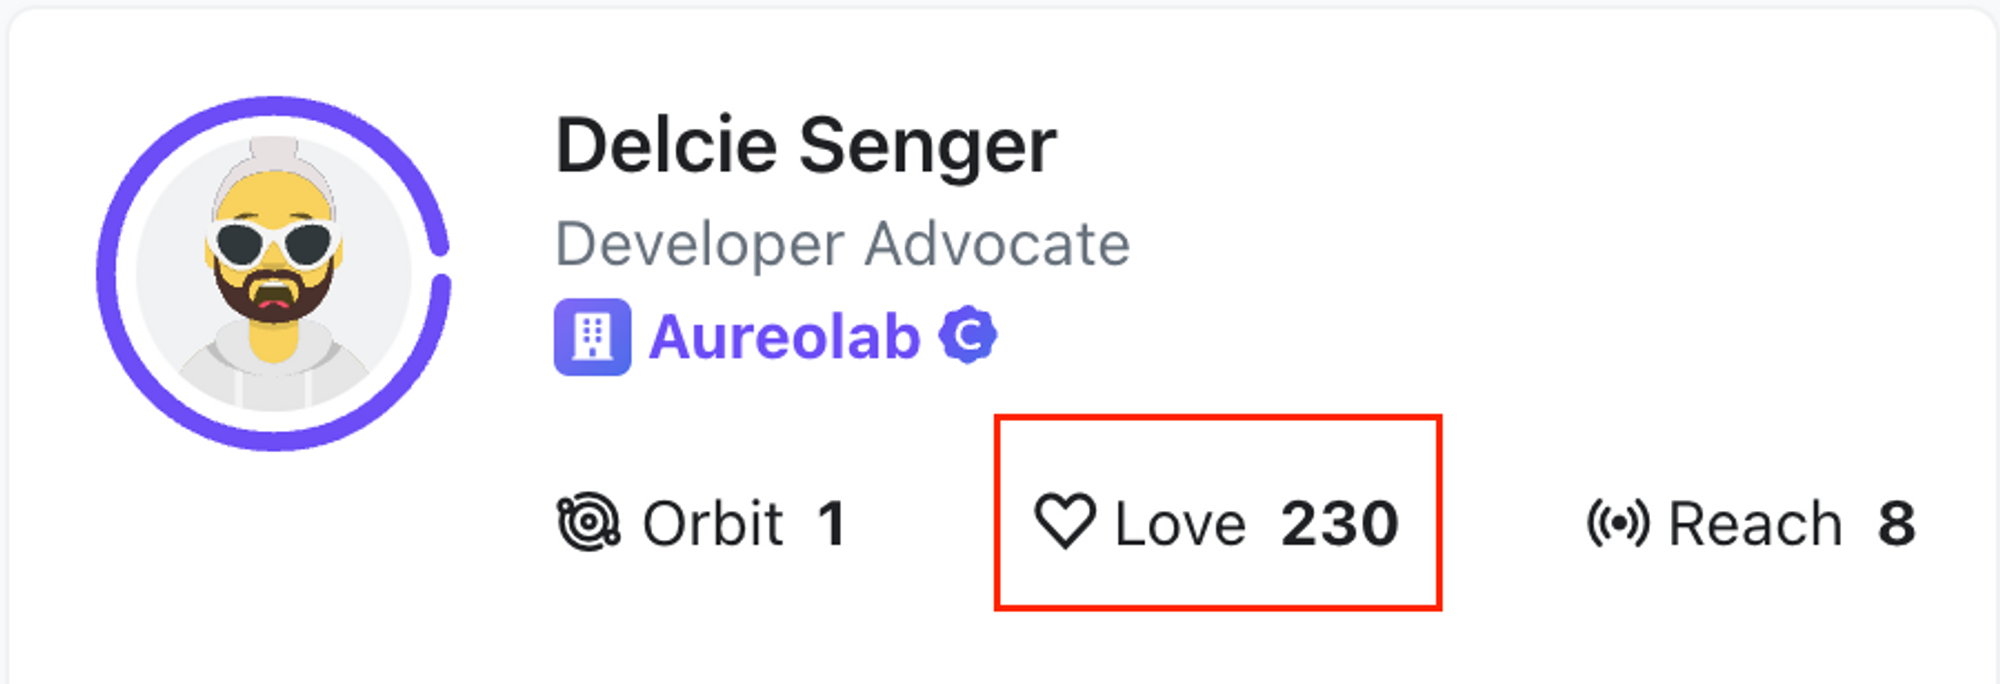 You can find someone’s love score on their member profile.